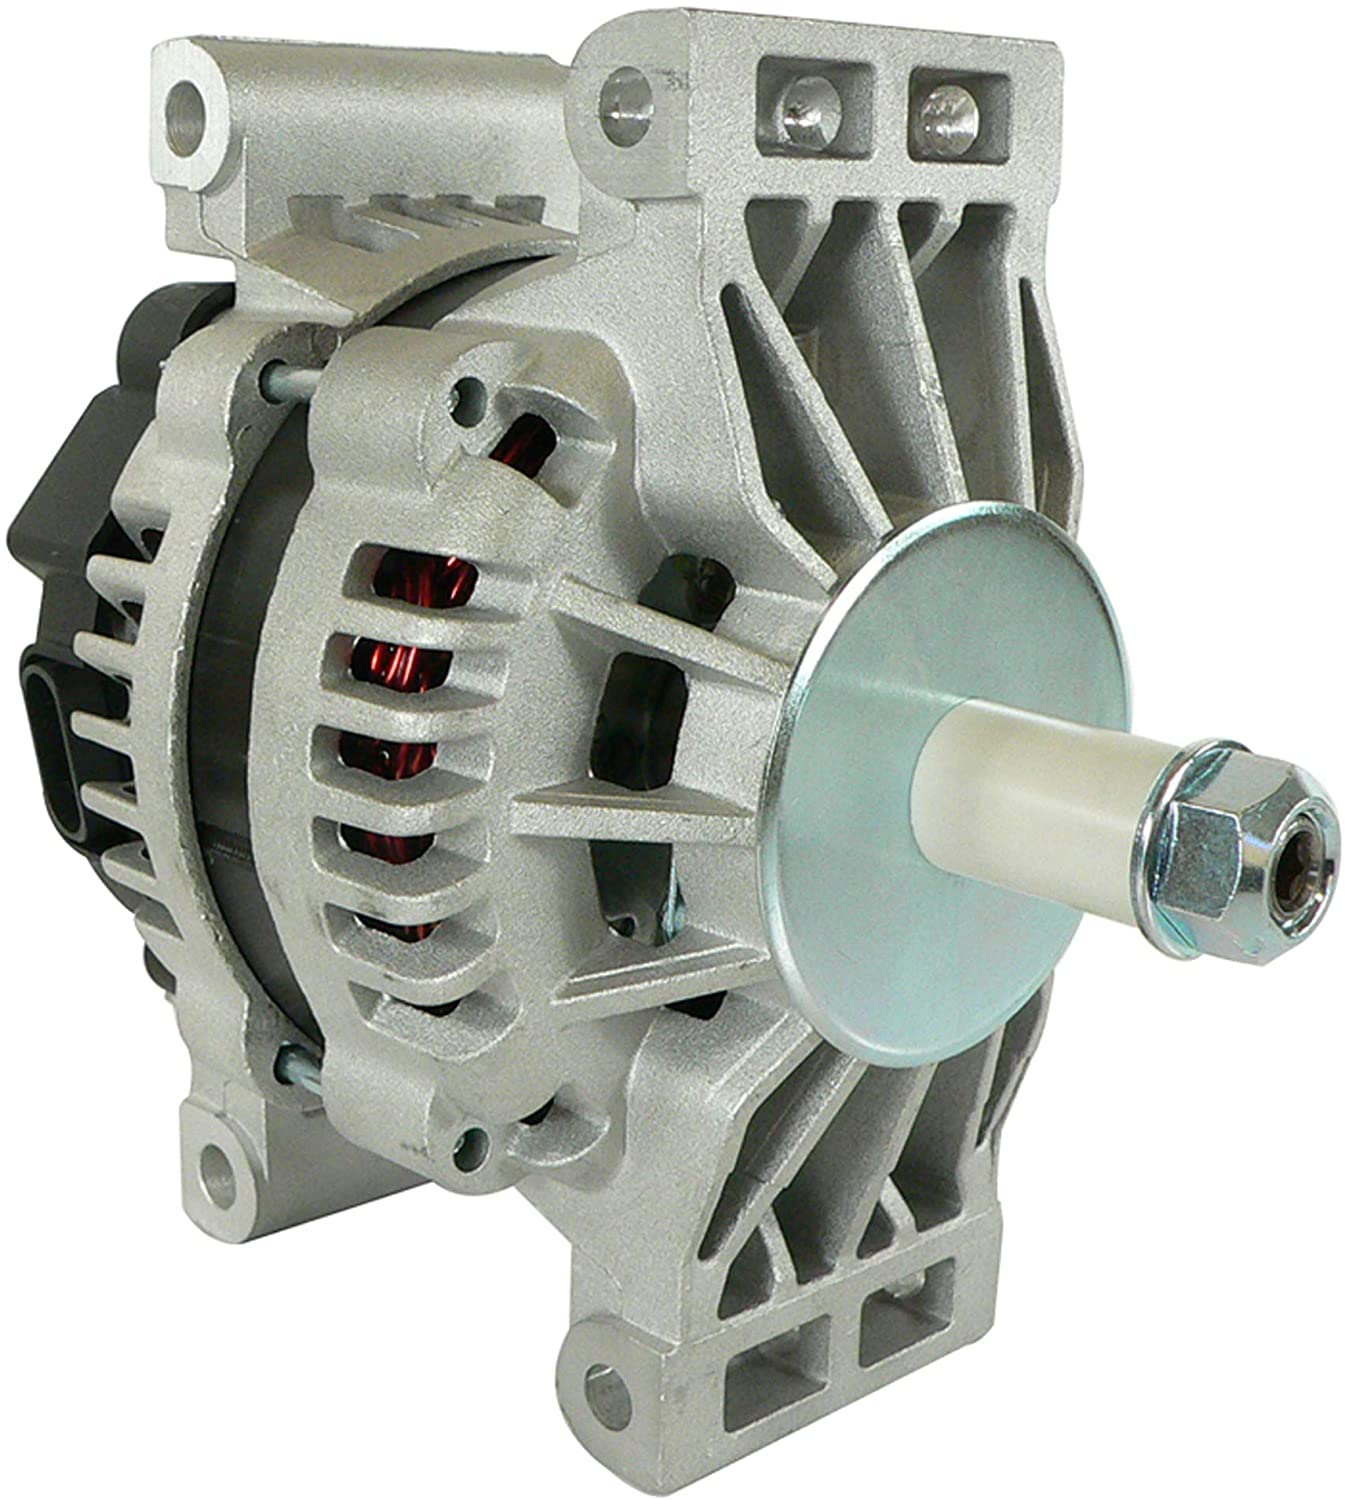 DB Electrical ADR0380 Alternator Compatible With/Replacement For International Truck 9100-9900, Kenworth C500 T300 T600 T800, Peterbilt, Sterling, Acterra A-Line L-Line, Volvo Vhd Vnm BAL9961LH